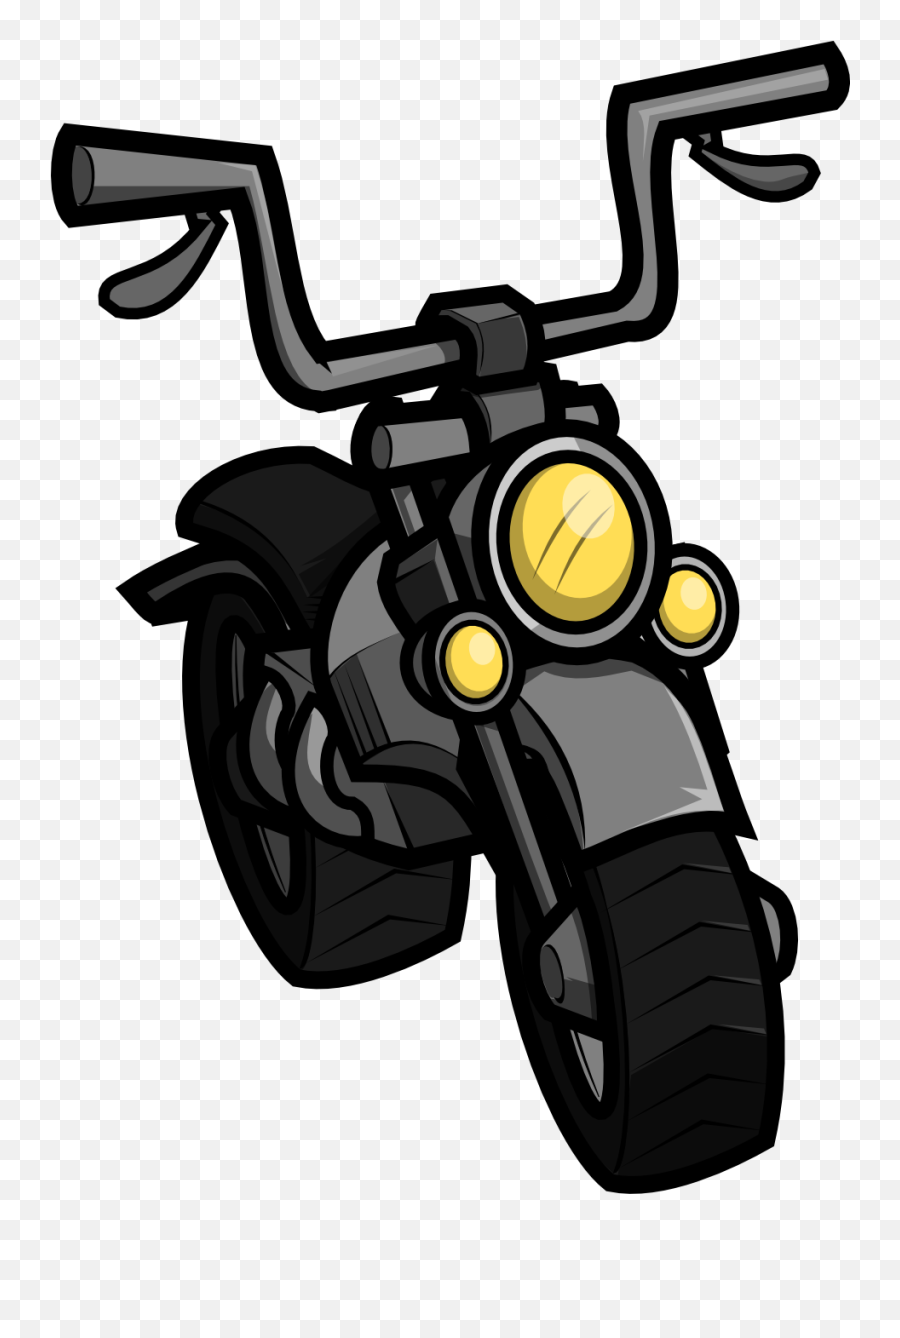 Motorcycle Clipart Harley Of Motorbikes - Cartoon Motorcycle Clipart Emoji,Motorcycle Emoji Harley